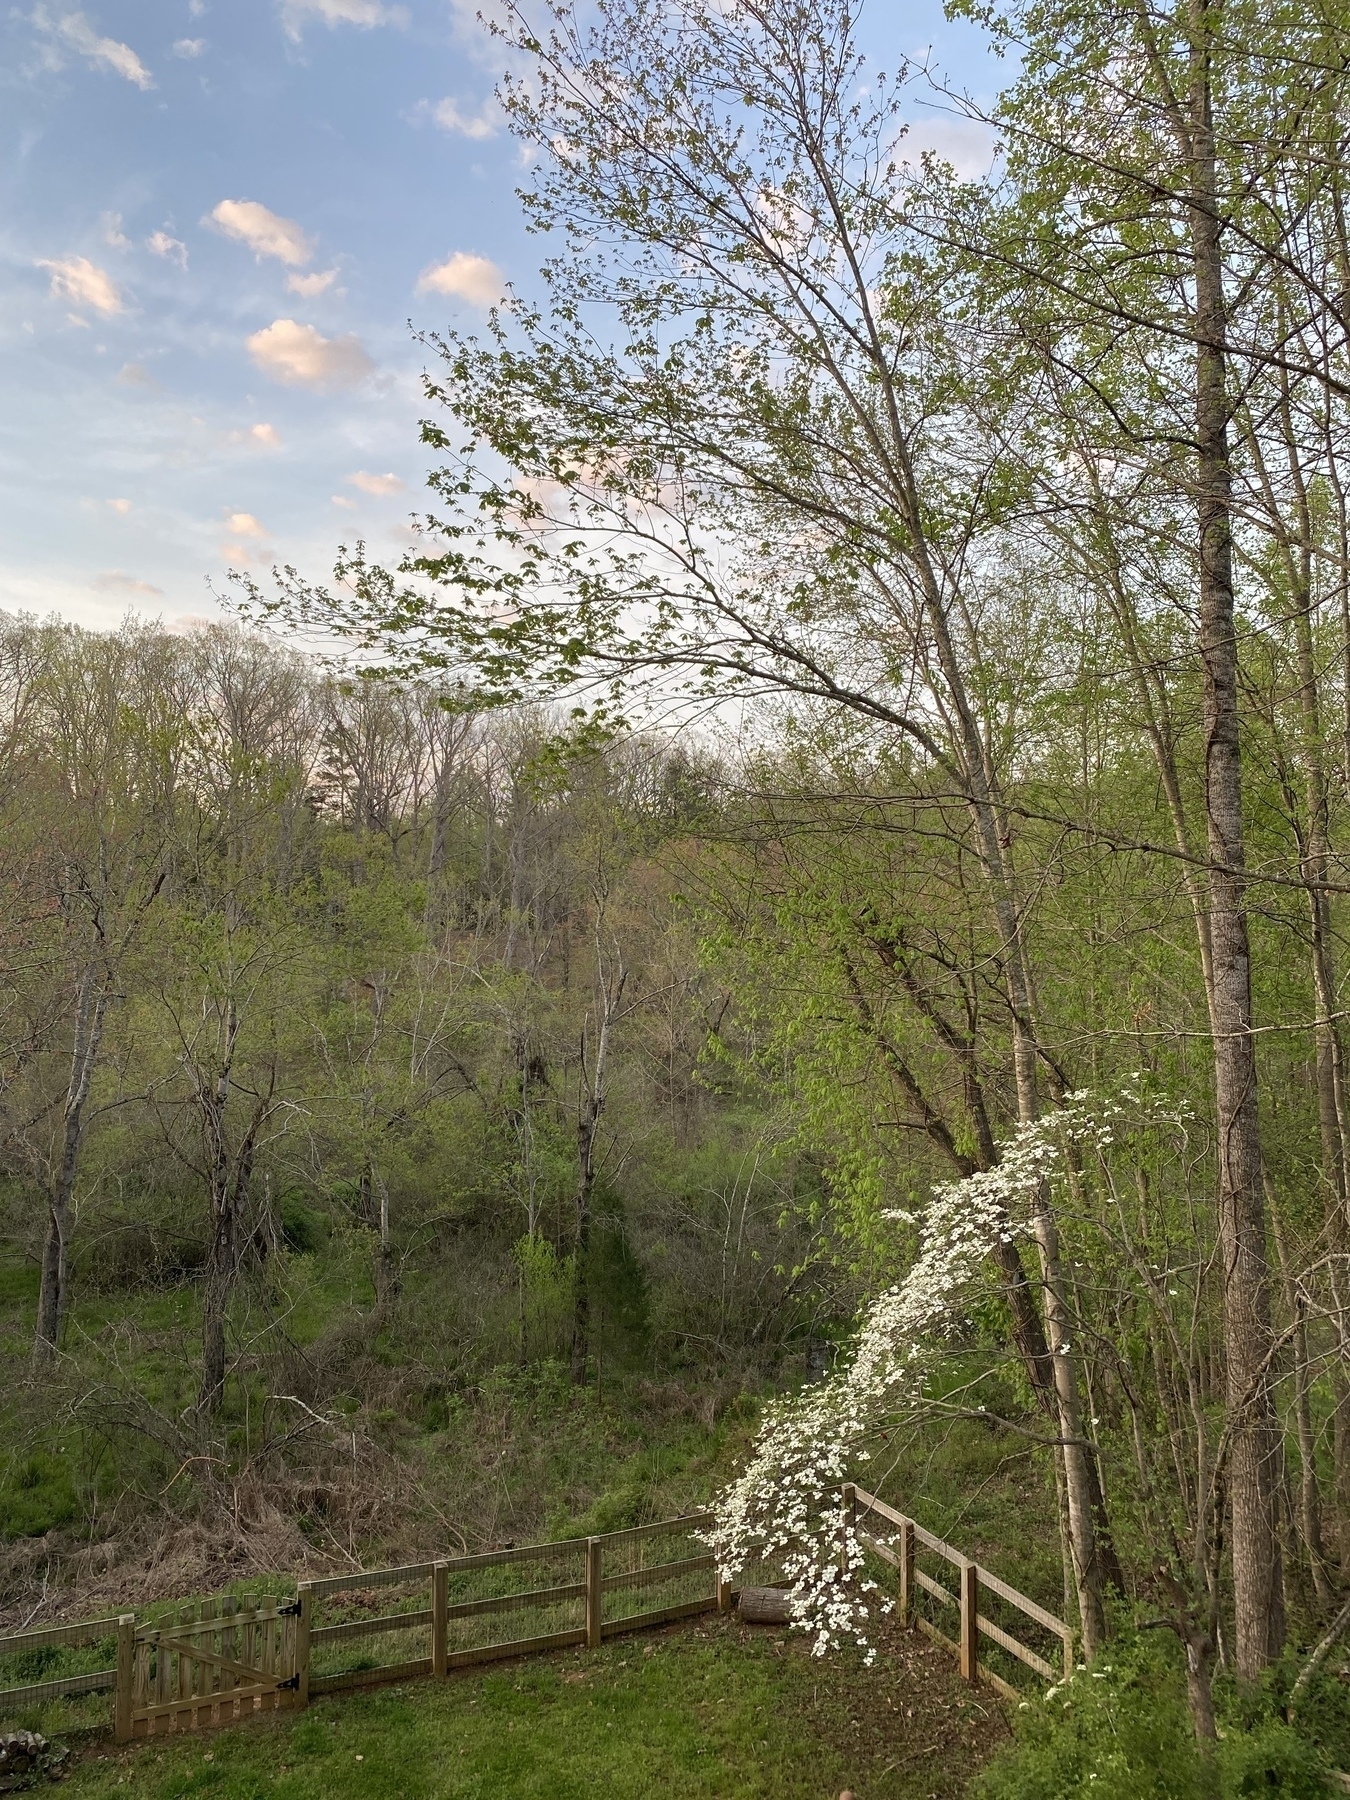 A picture of the trees in our back yard. A Dogwood blooms in the foreground with a bit of morning sky in the upper left.